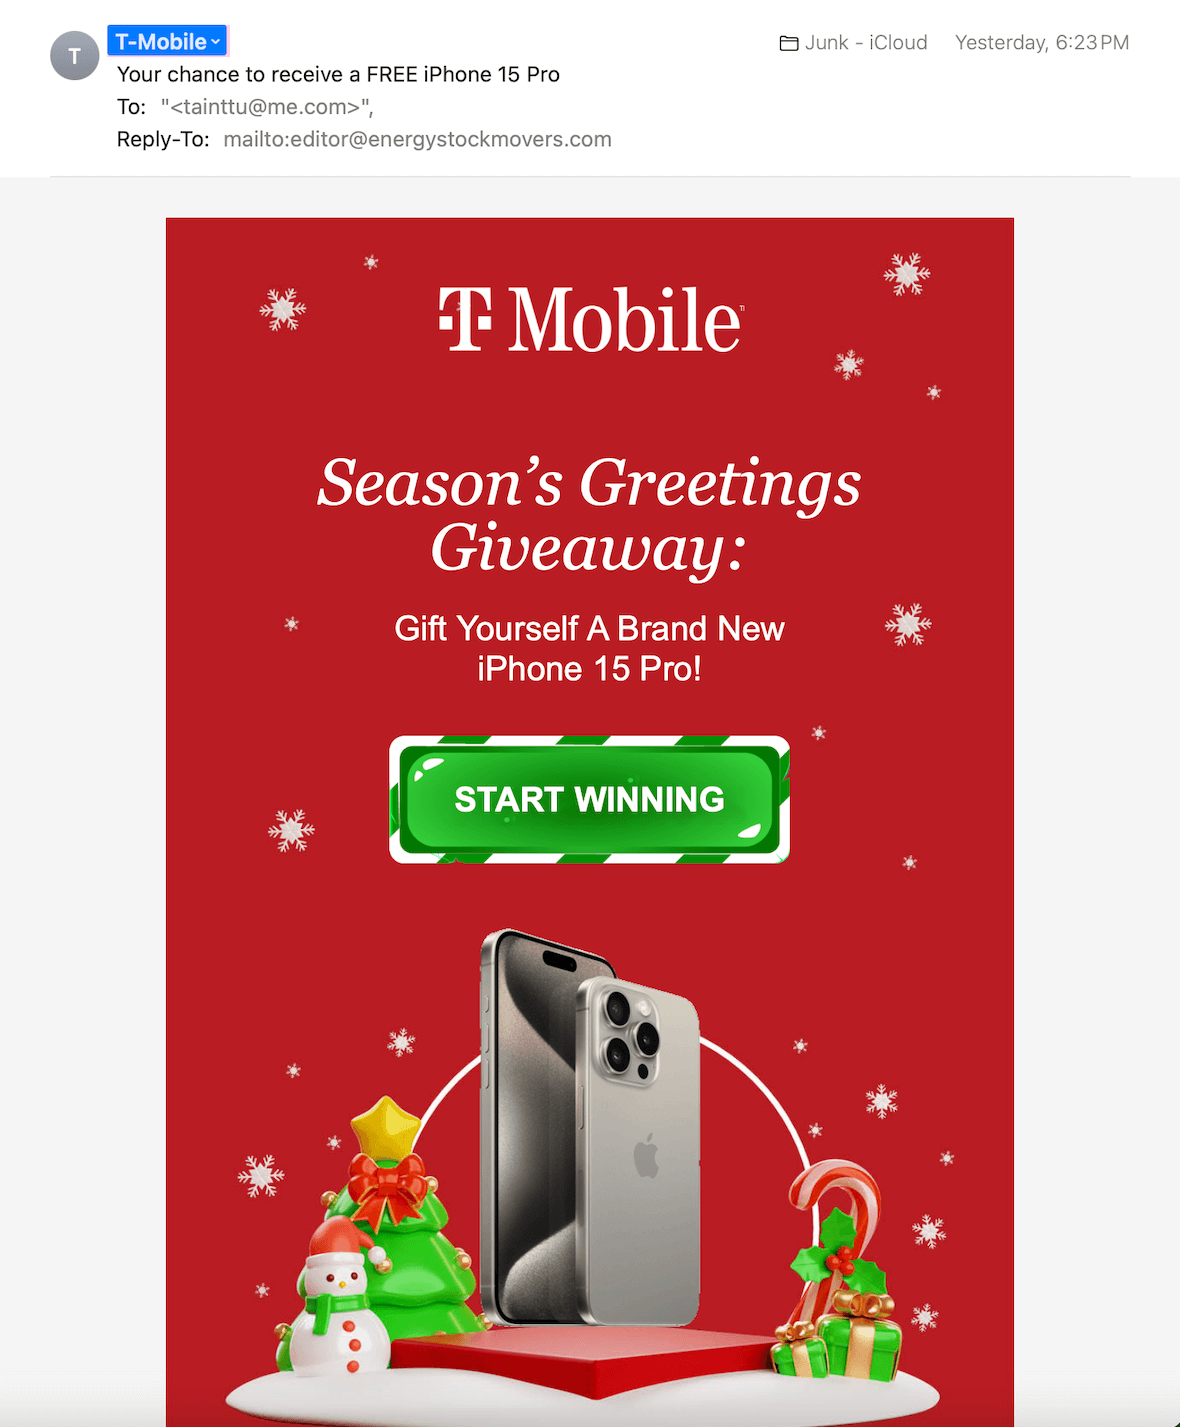 A screenshot of a social engineering email using a prize.